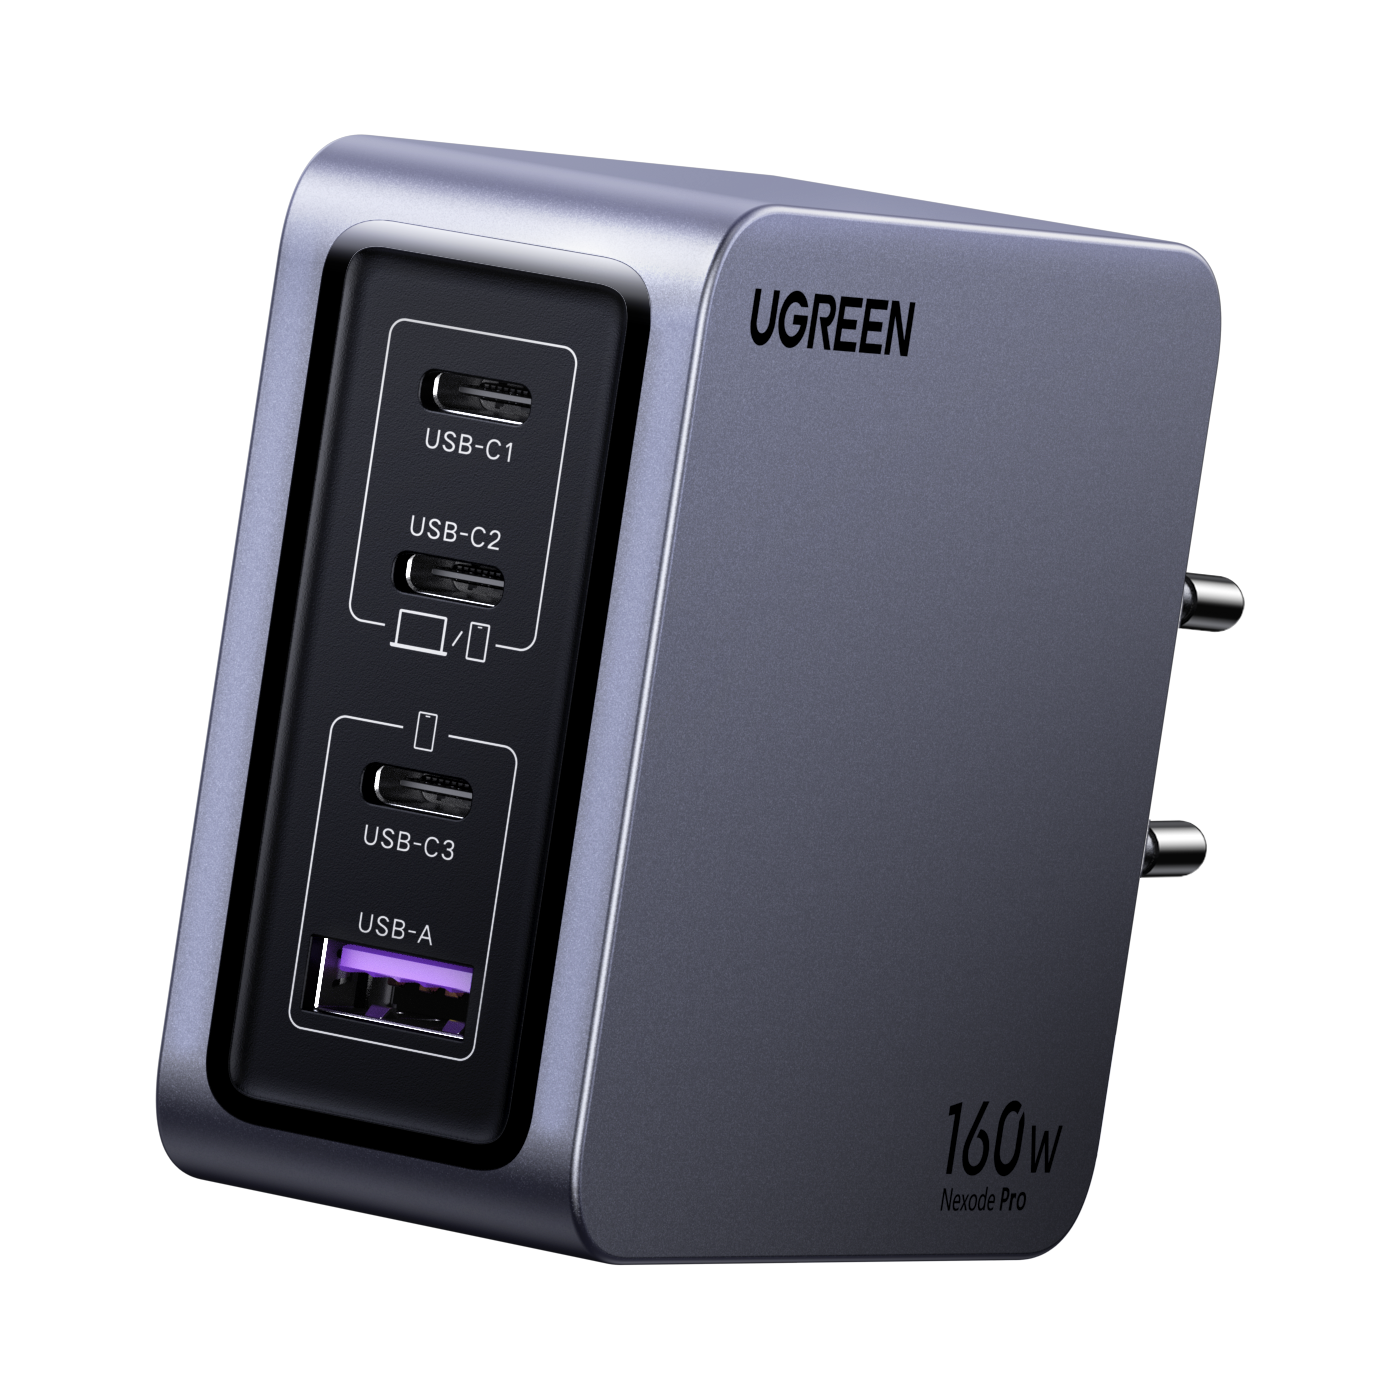 Ugreen Nexode Pro 160W 4-Port GaN Fast Charger review: Packing a punch of  power